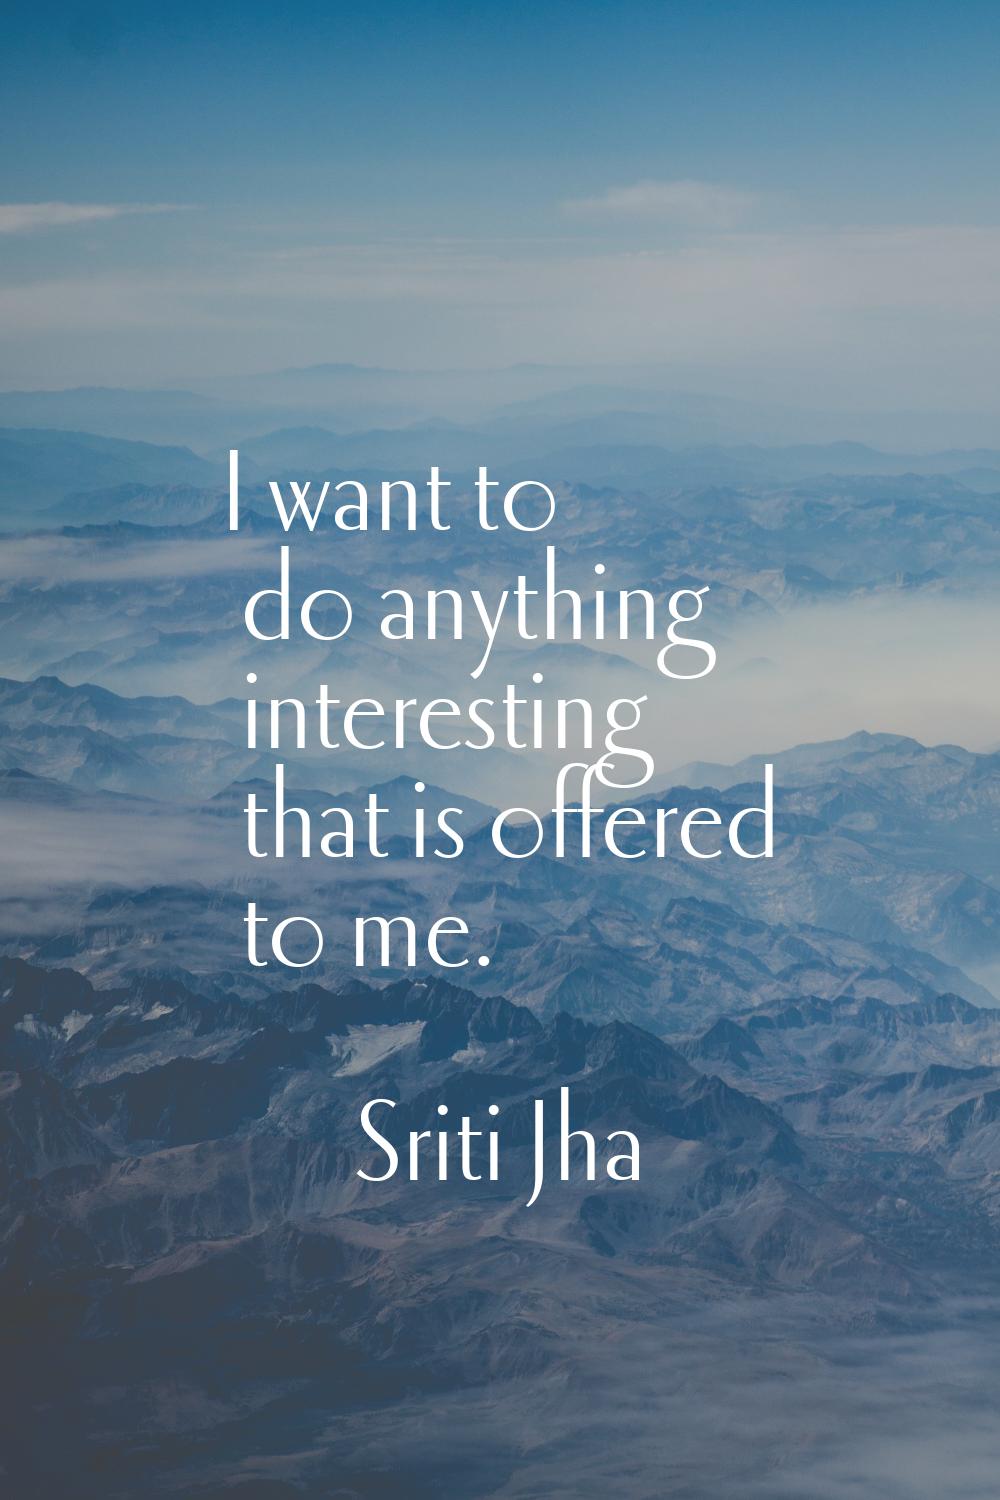 I want to do anything interesting that is offered to me.